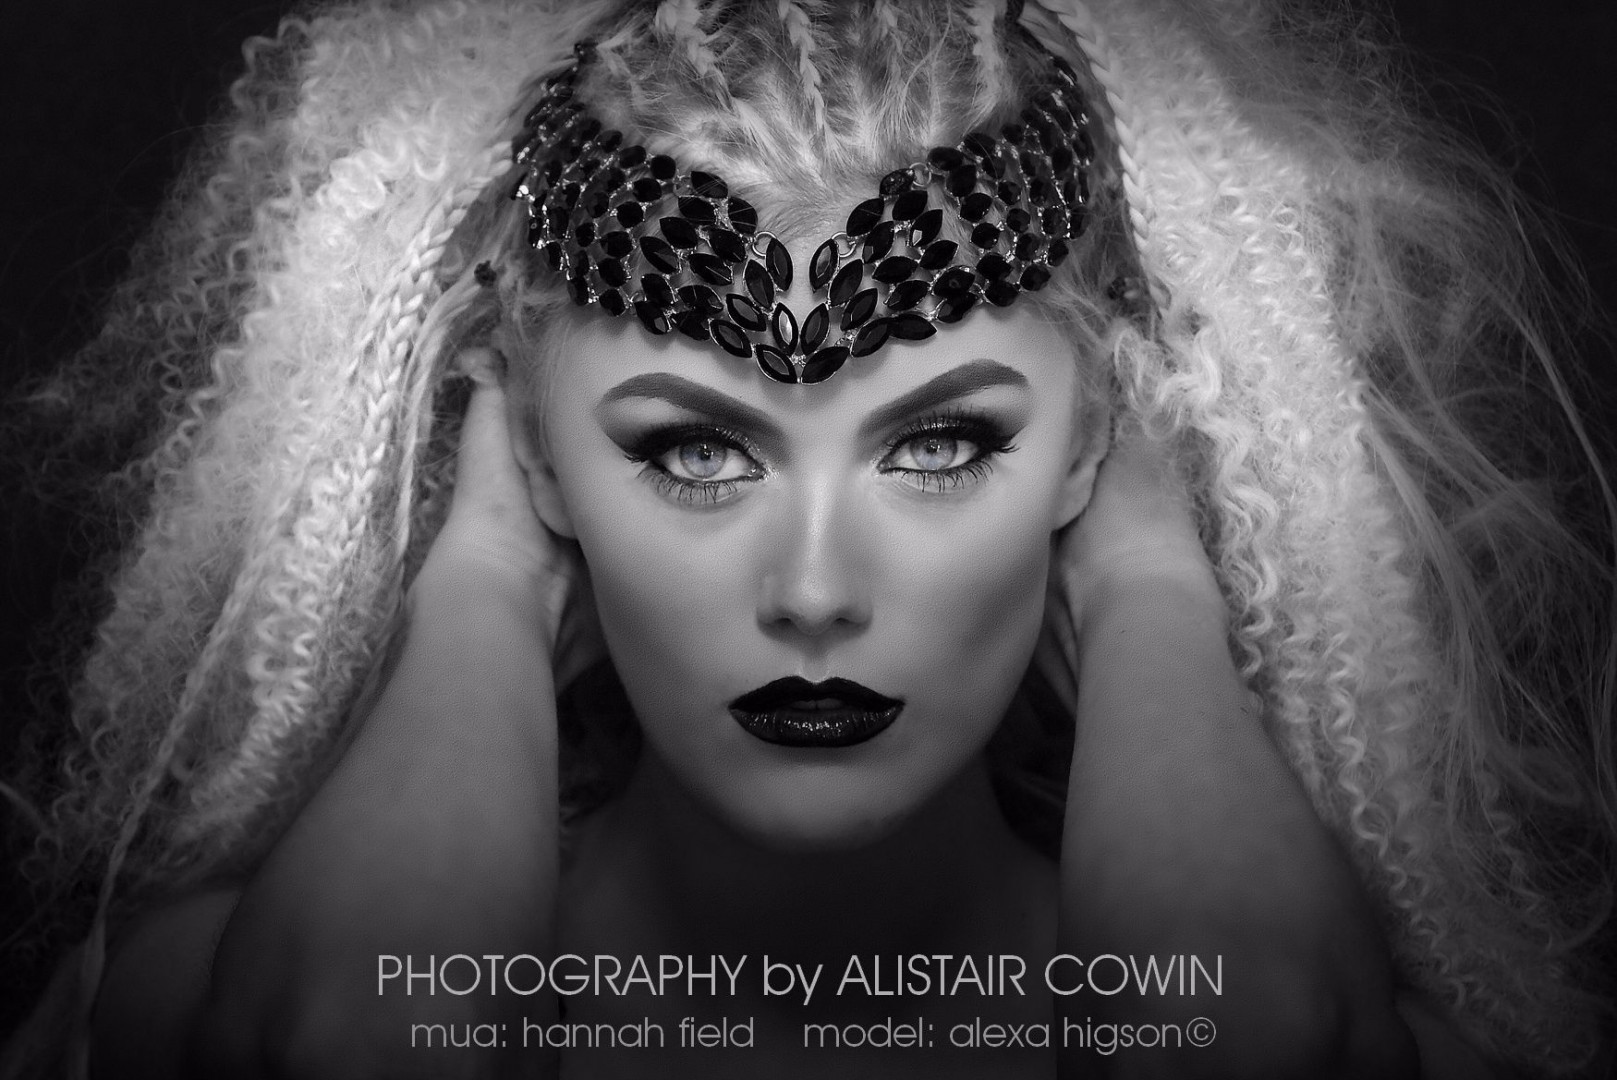 ALEXA with ALISTAIR <br />
Studio beauty shoot for editorial submission - April 2017<br />
Model: Alexa May Higson H&MUA: Hannah Louise Field Mua Photos: Alistair Cowin